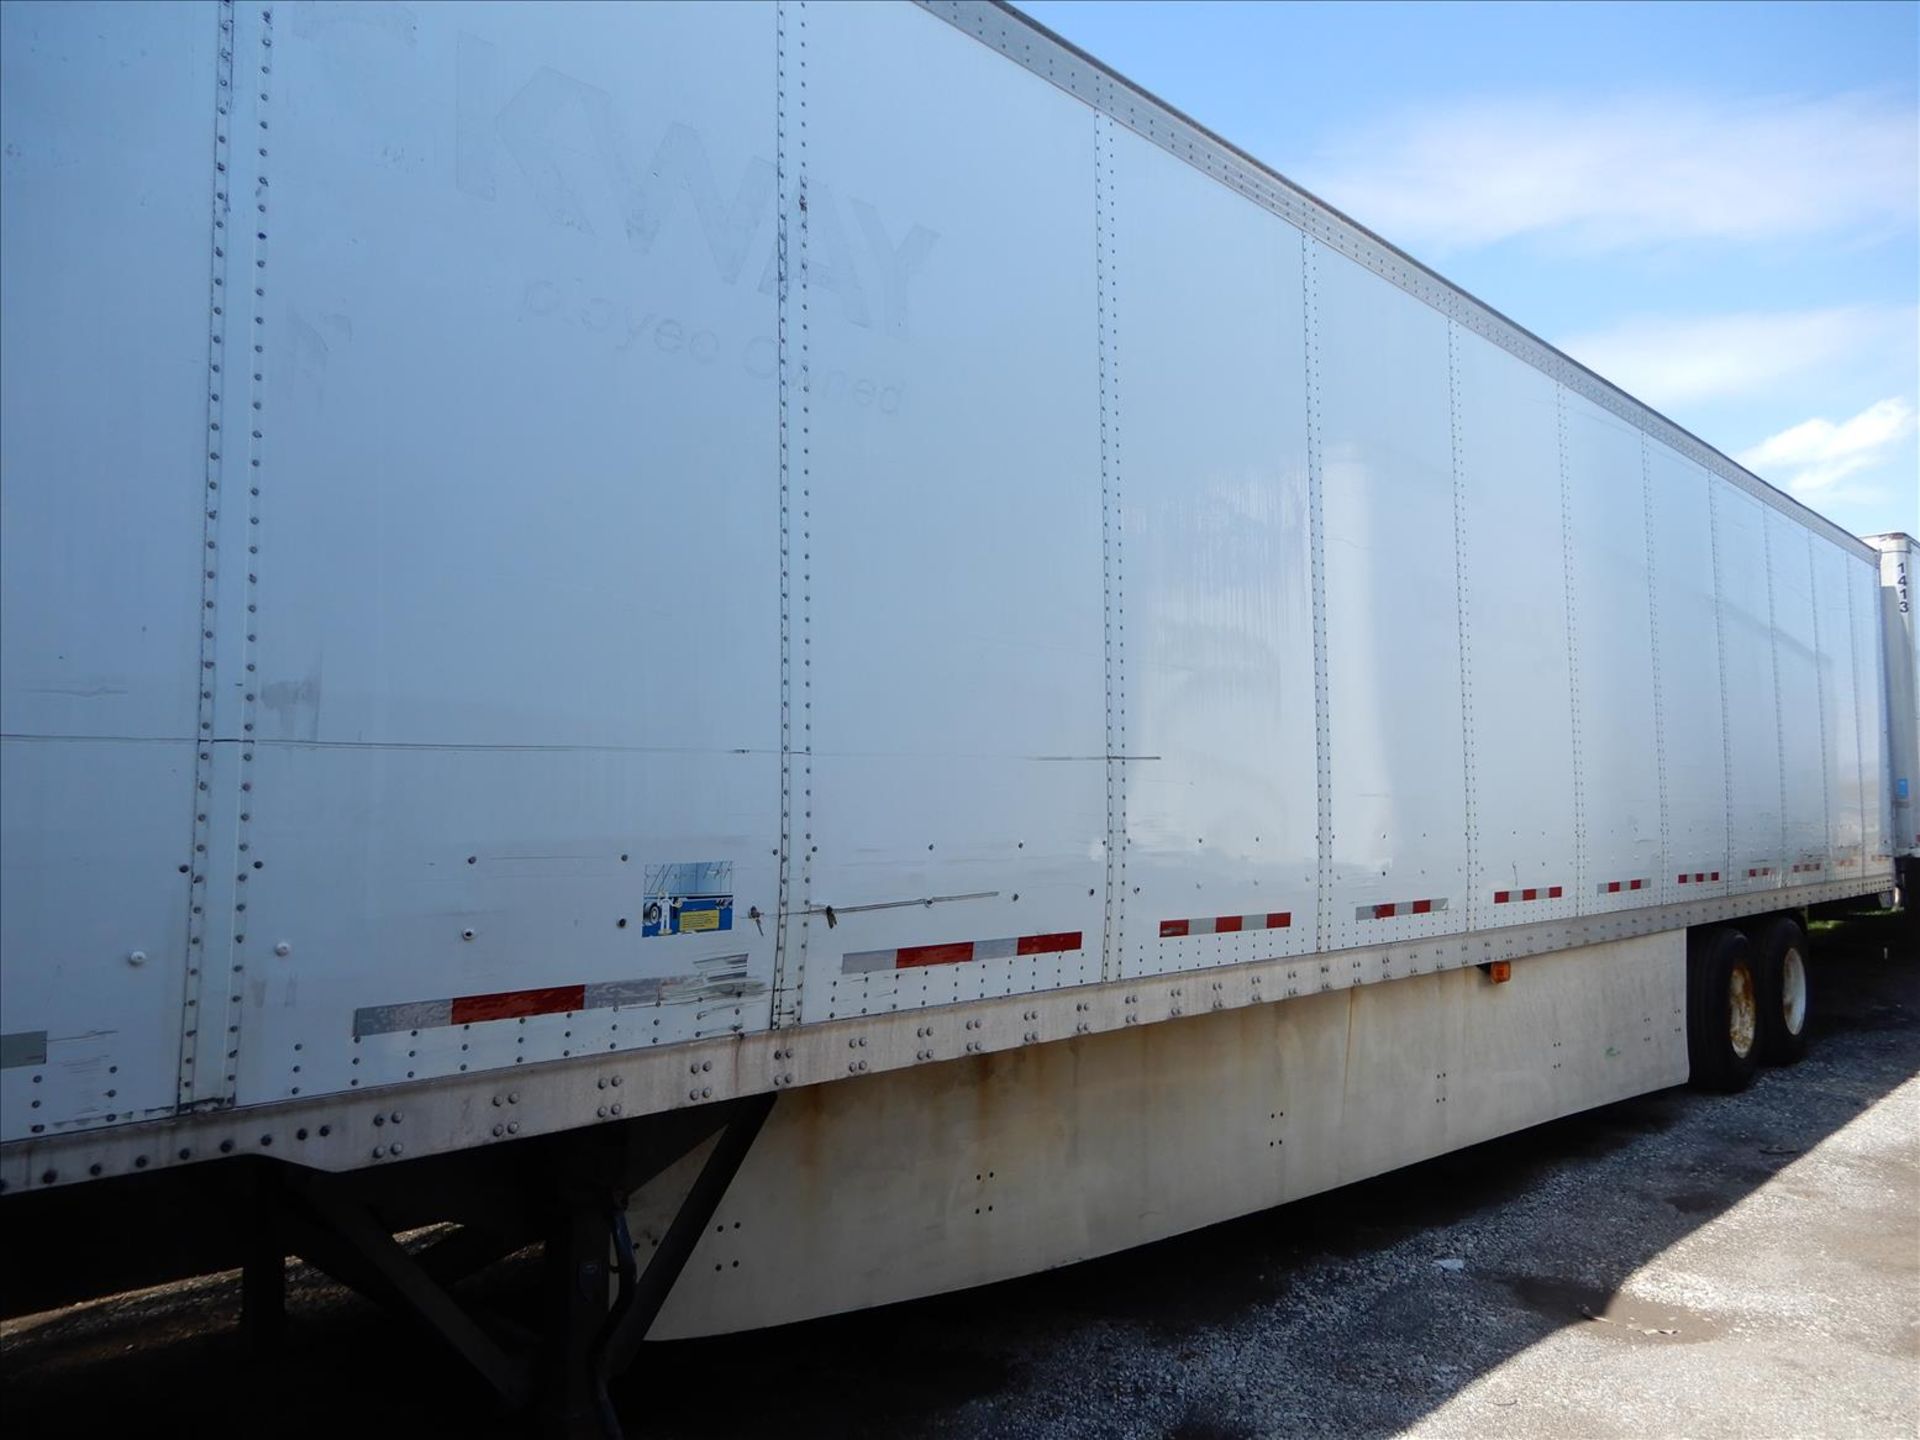 2012 Vanguard Trailer - Located in Indianapolis, IN - Image 2 of 27